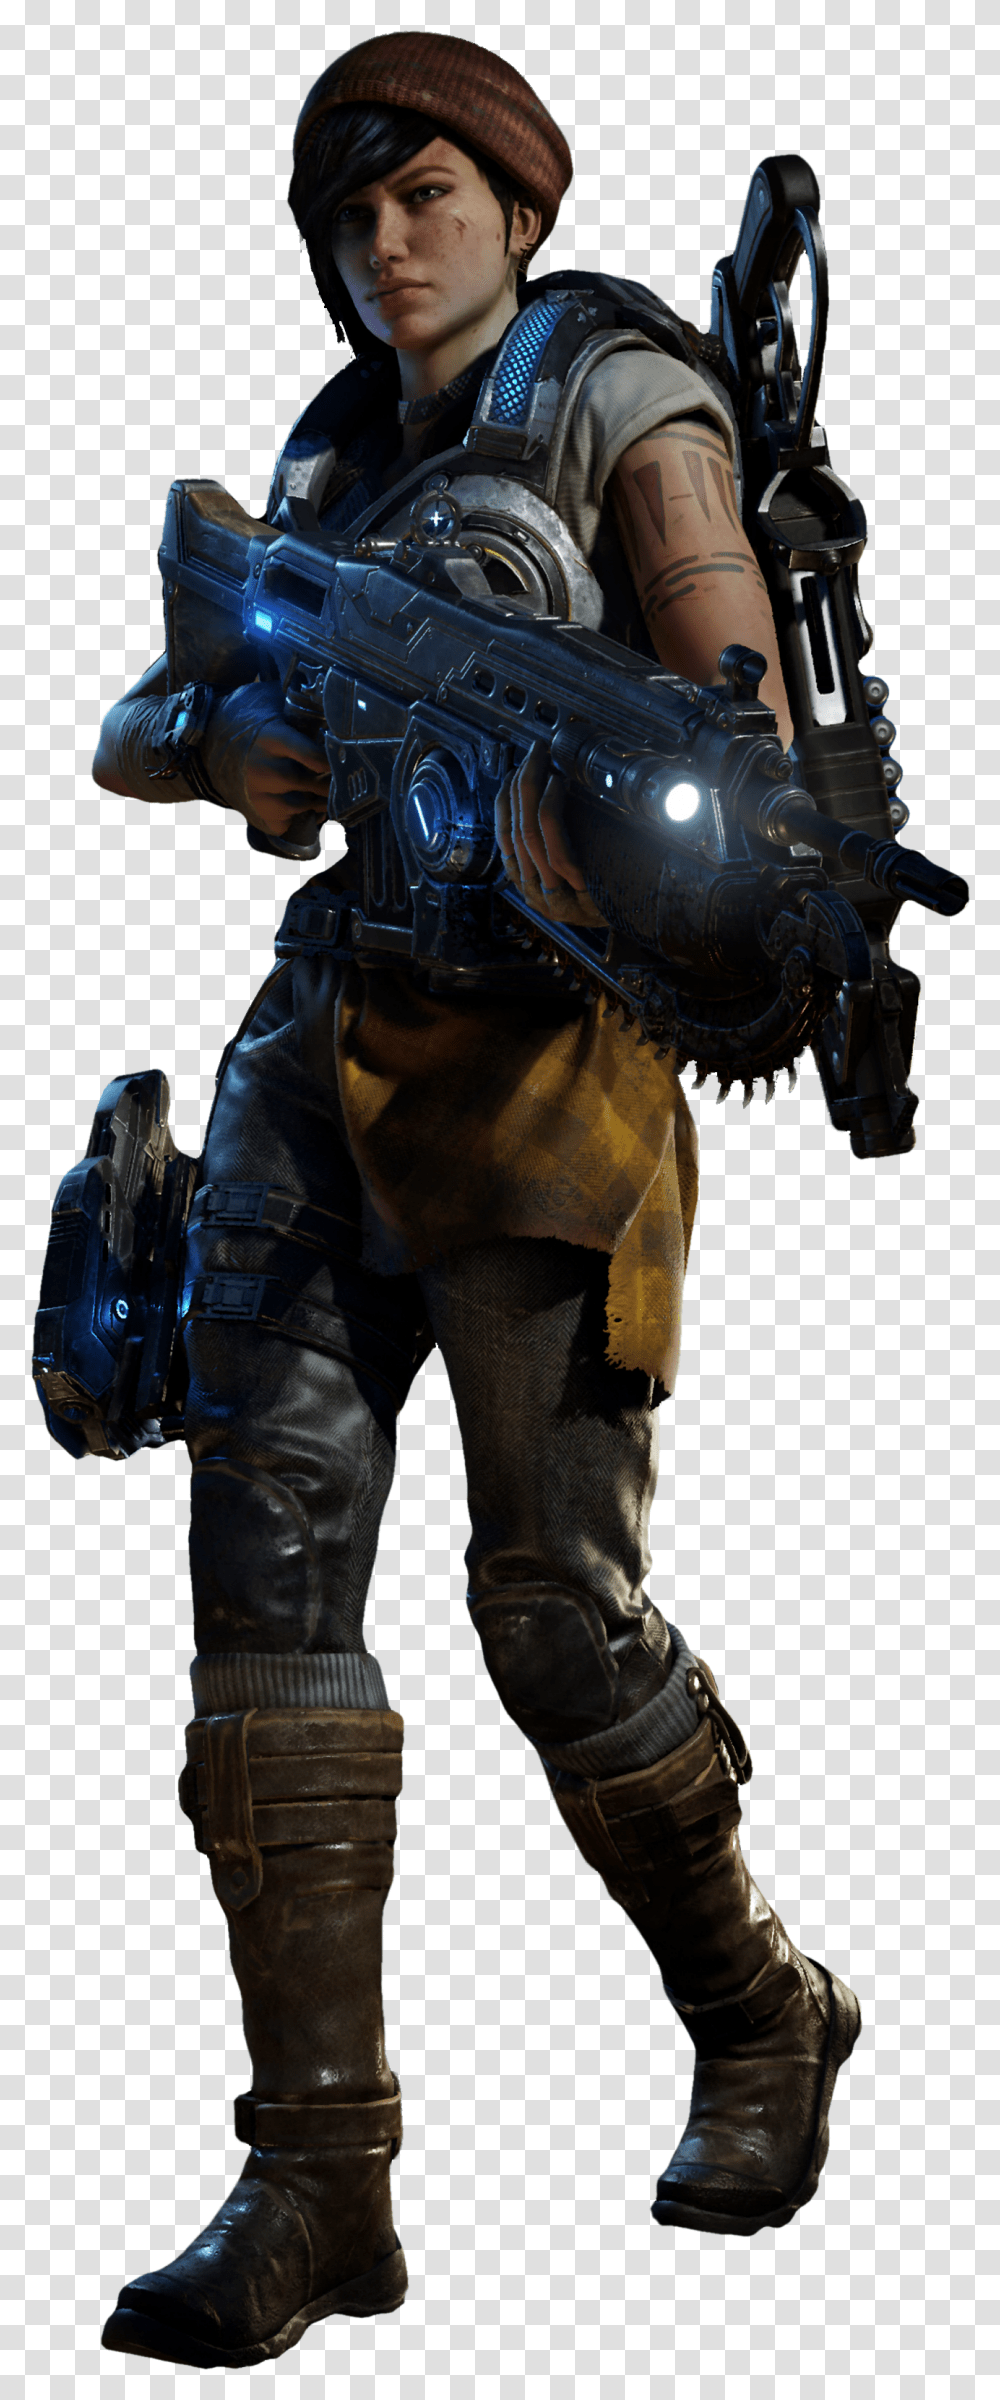 Wallpaper Pc Gaming Toy Person Gears Of War 4 Kait Kate Diaz Gears Of War 4, Clothing, Boot, Footwear, Helmet Transparent Png